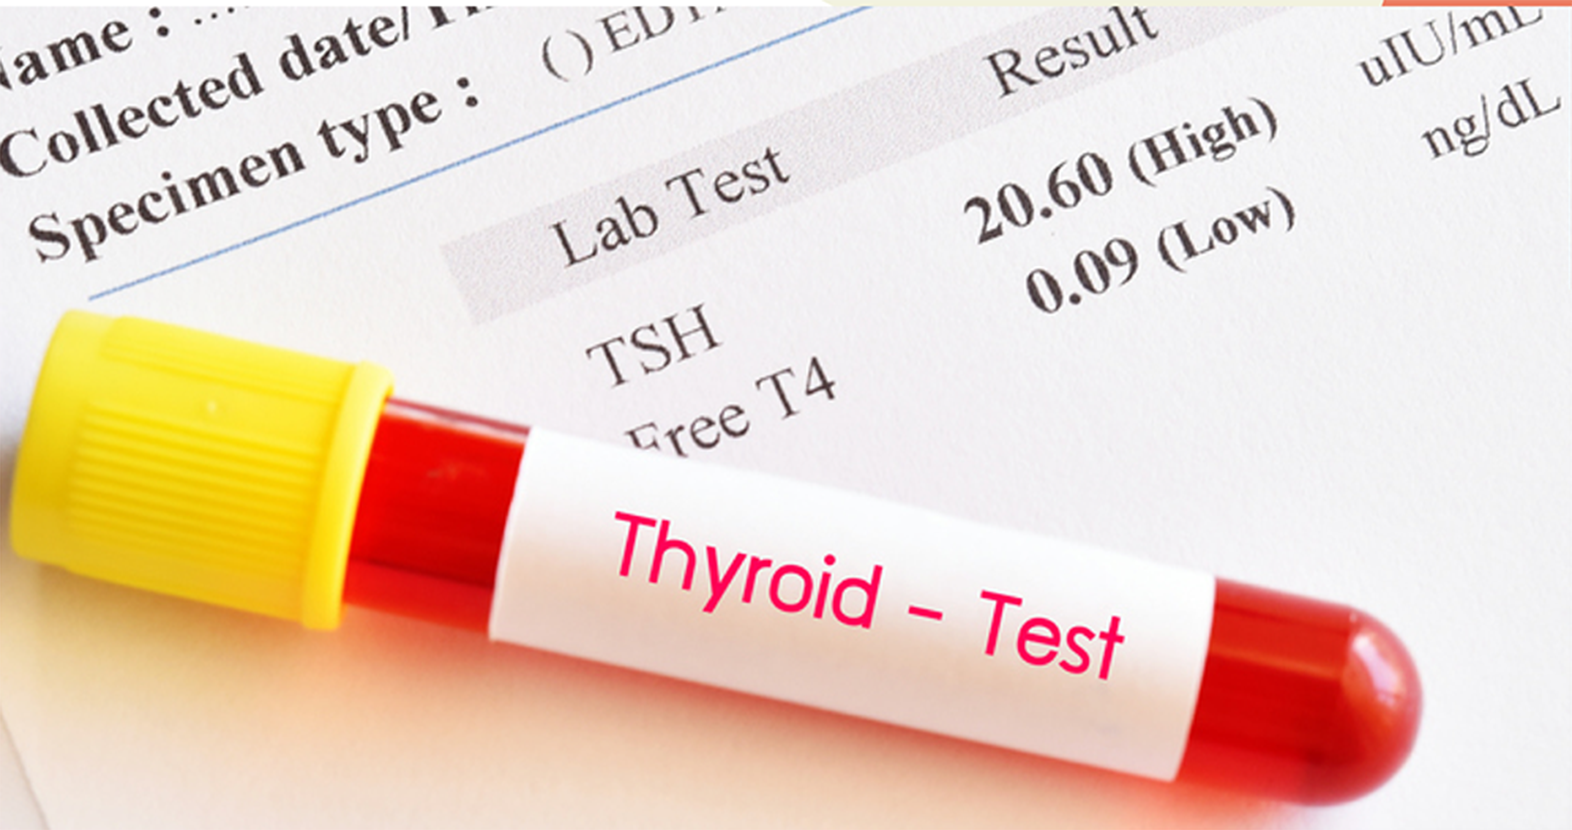 Image showing testing tube for thyroid placed on a paper showing patient report 